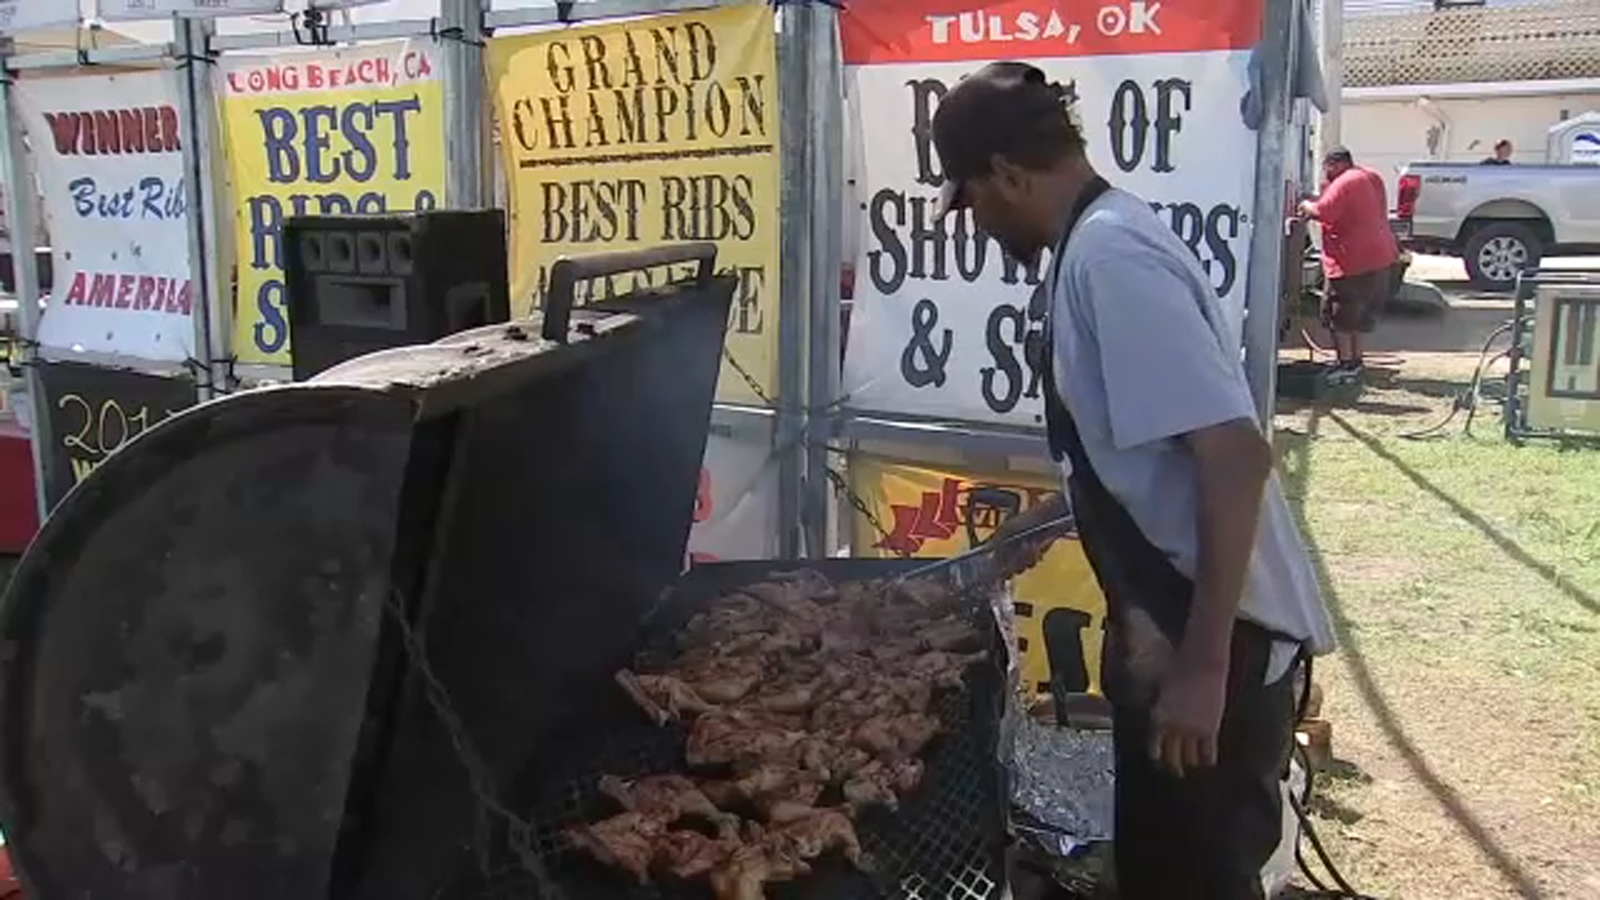 No Ribfest 2024 planned, in Naperville, DuPage County or elsewhere, Exchange Club of Naperville says [Video]